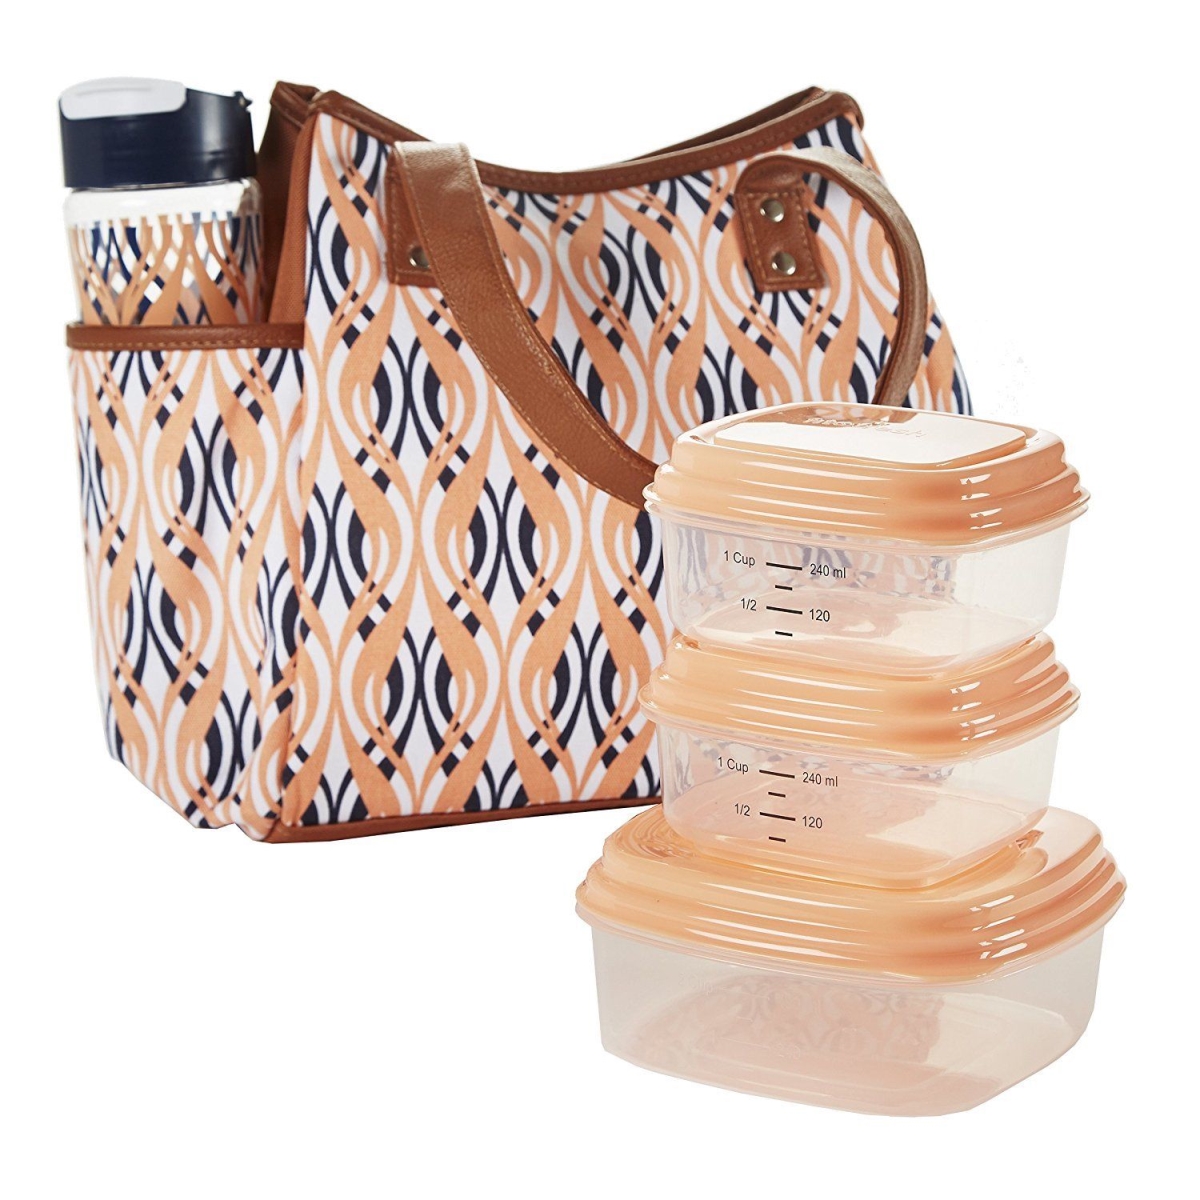 993ff1144 Westerly Insulated Lunch Bag Set With Reusable Containers